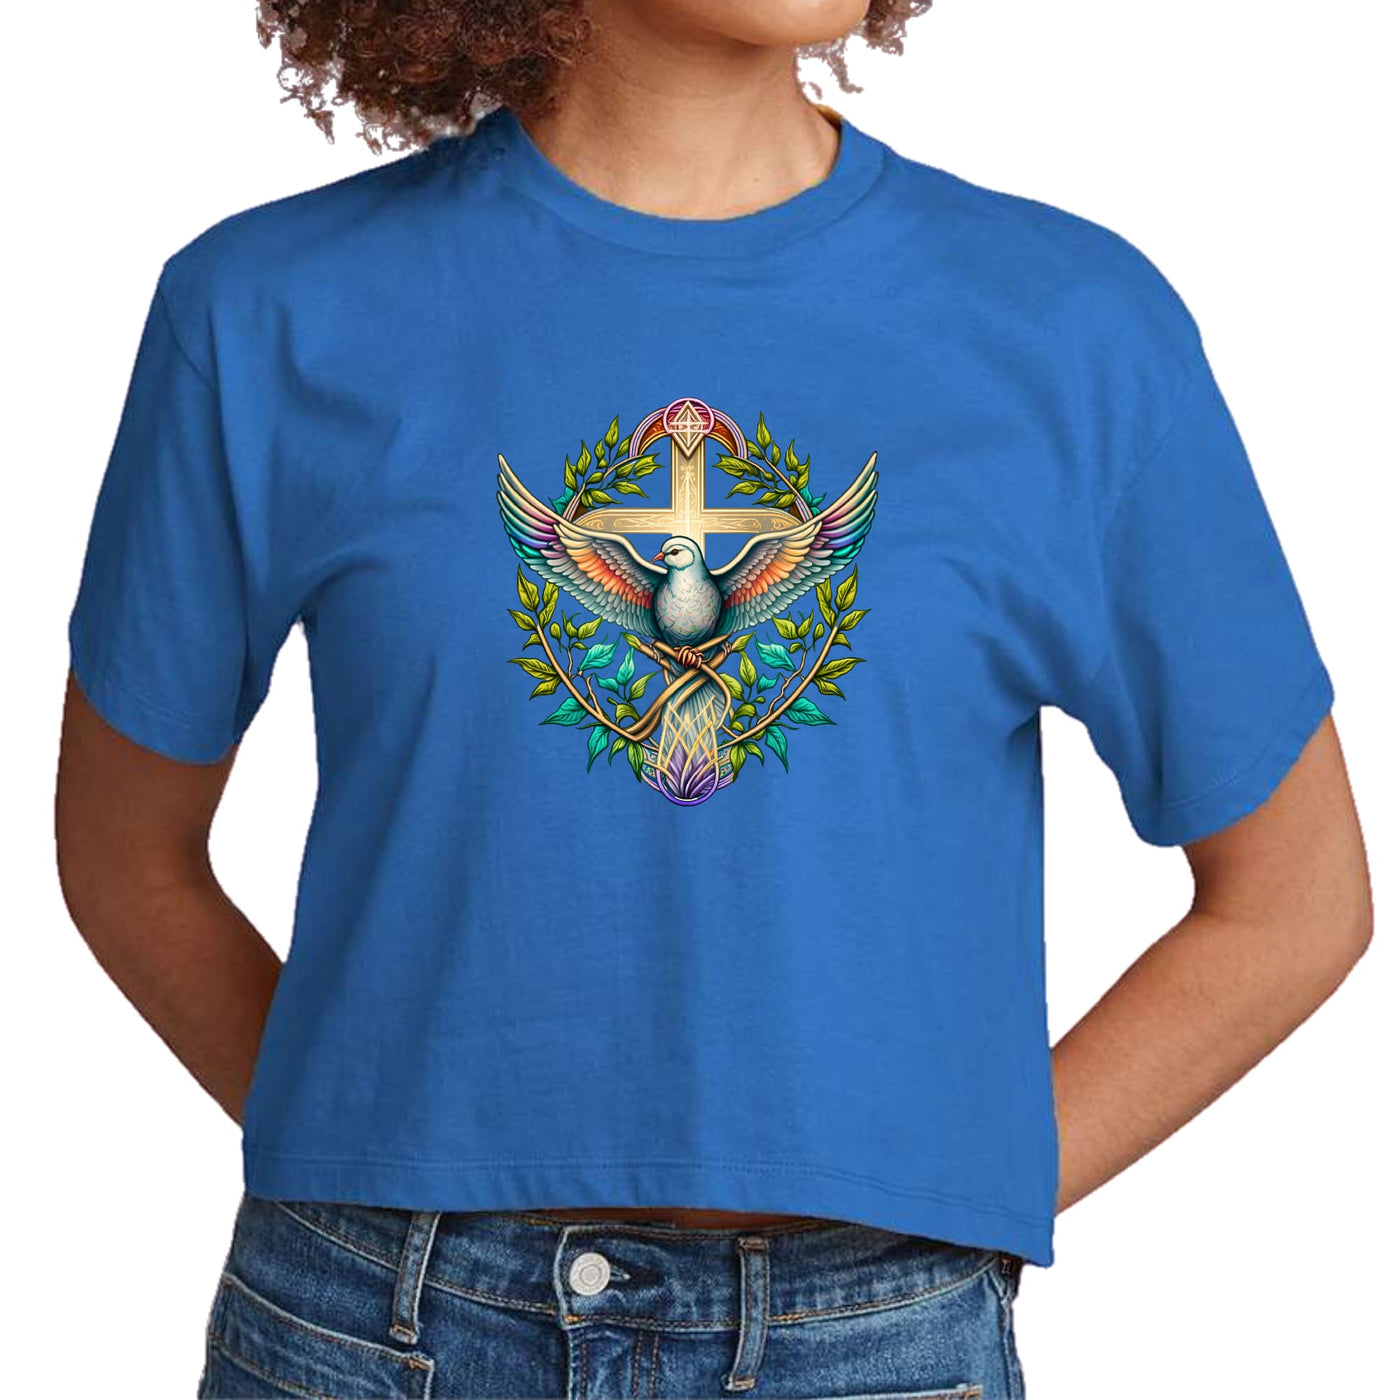 Womens Cropped Graphic T-shirt Blue Green Multicolor Dove Floral - Womens